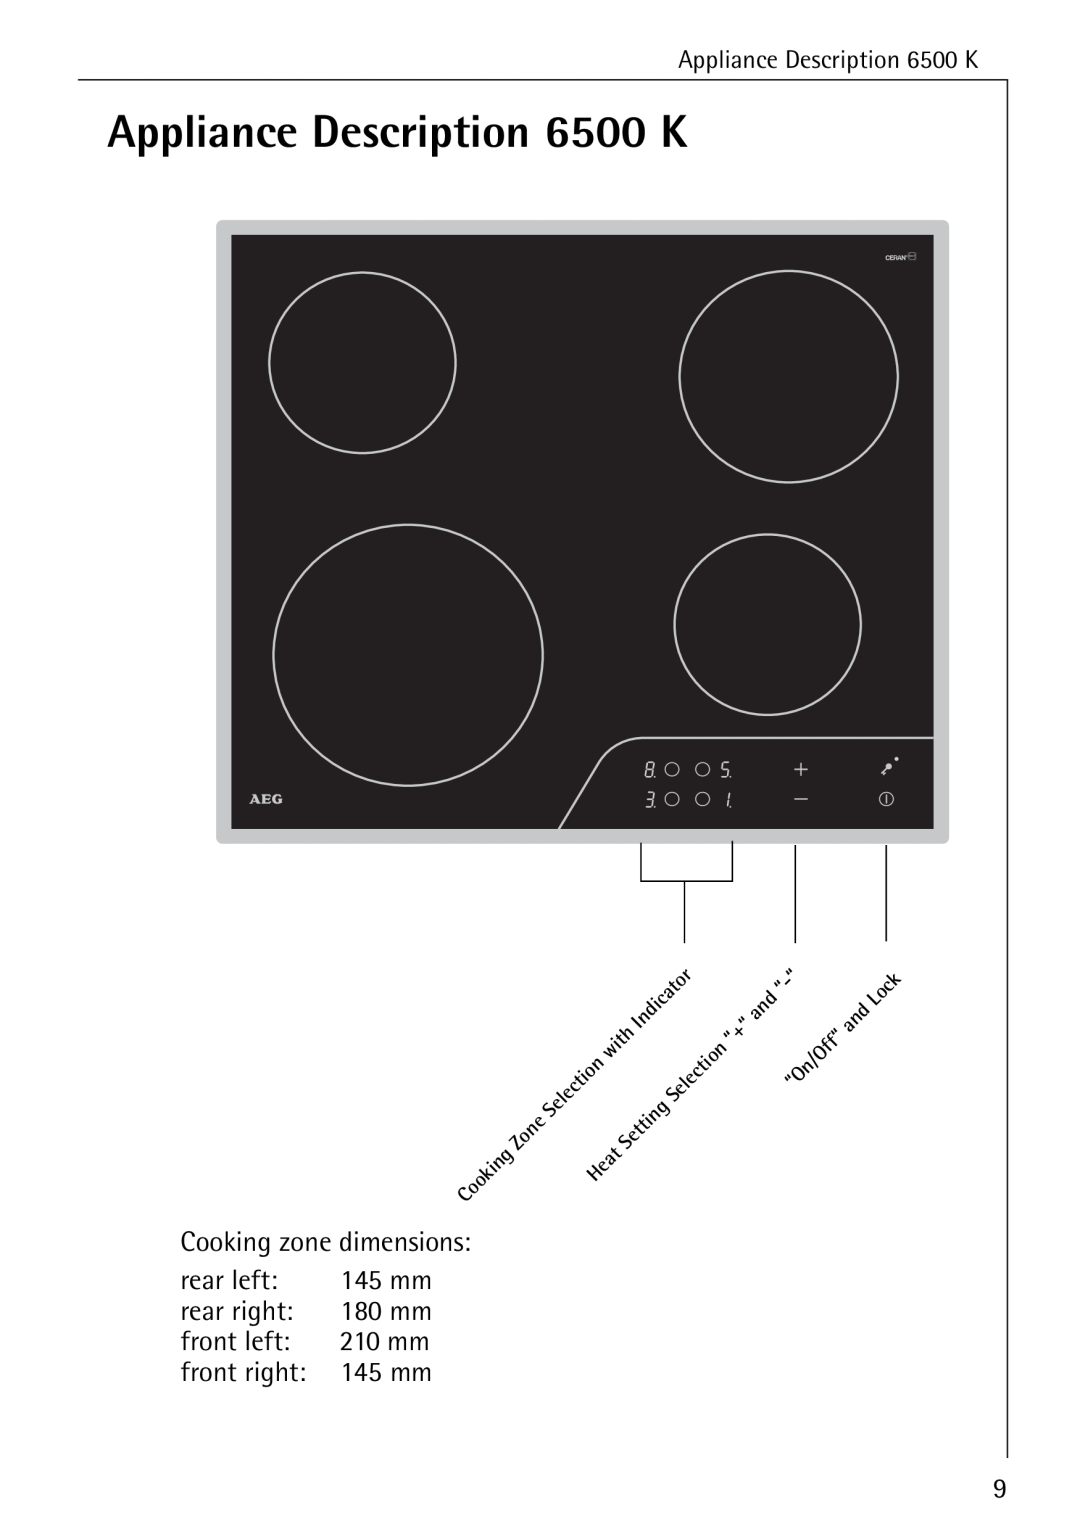 Electrolux manual Appliance Description 6500 K, Cooking zone dimensions, rear left, rear right, front left, front right 